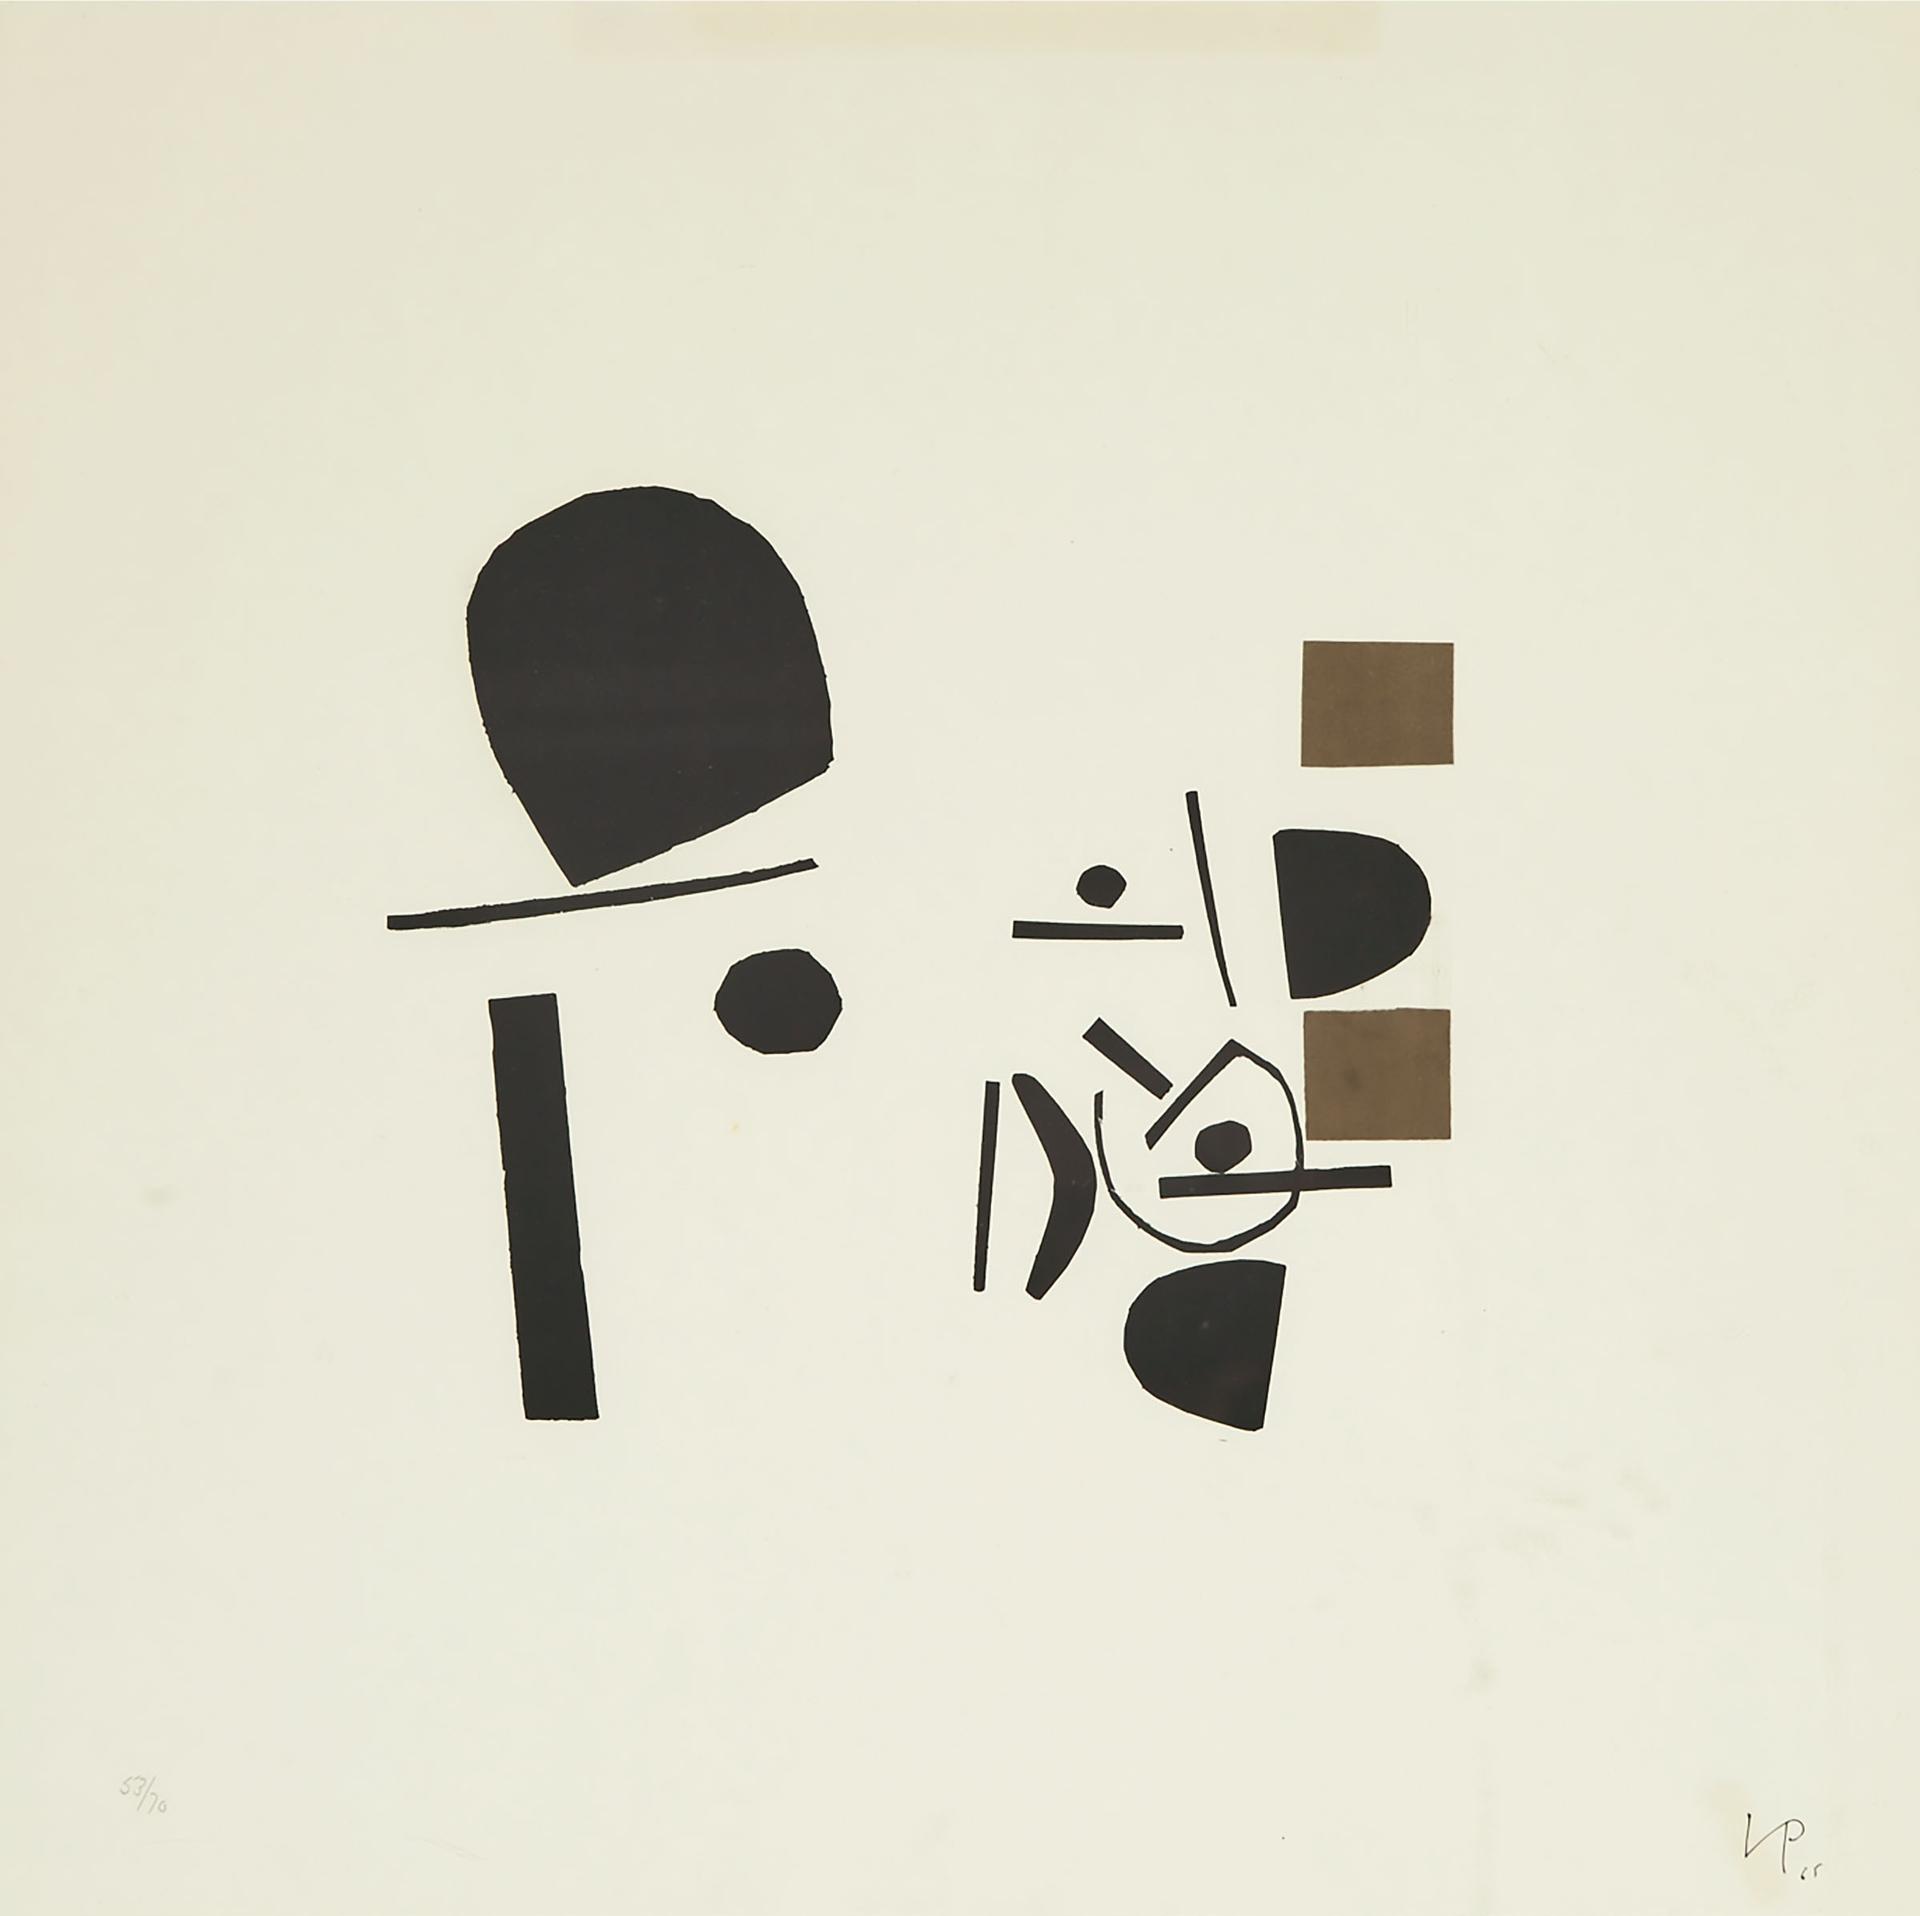 Victor Pasmore (1908-1998) - Points Of Contact #7, 1965 [bowness & Lambertini, 8]